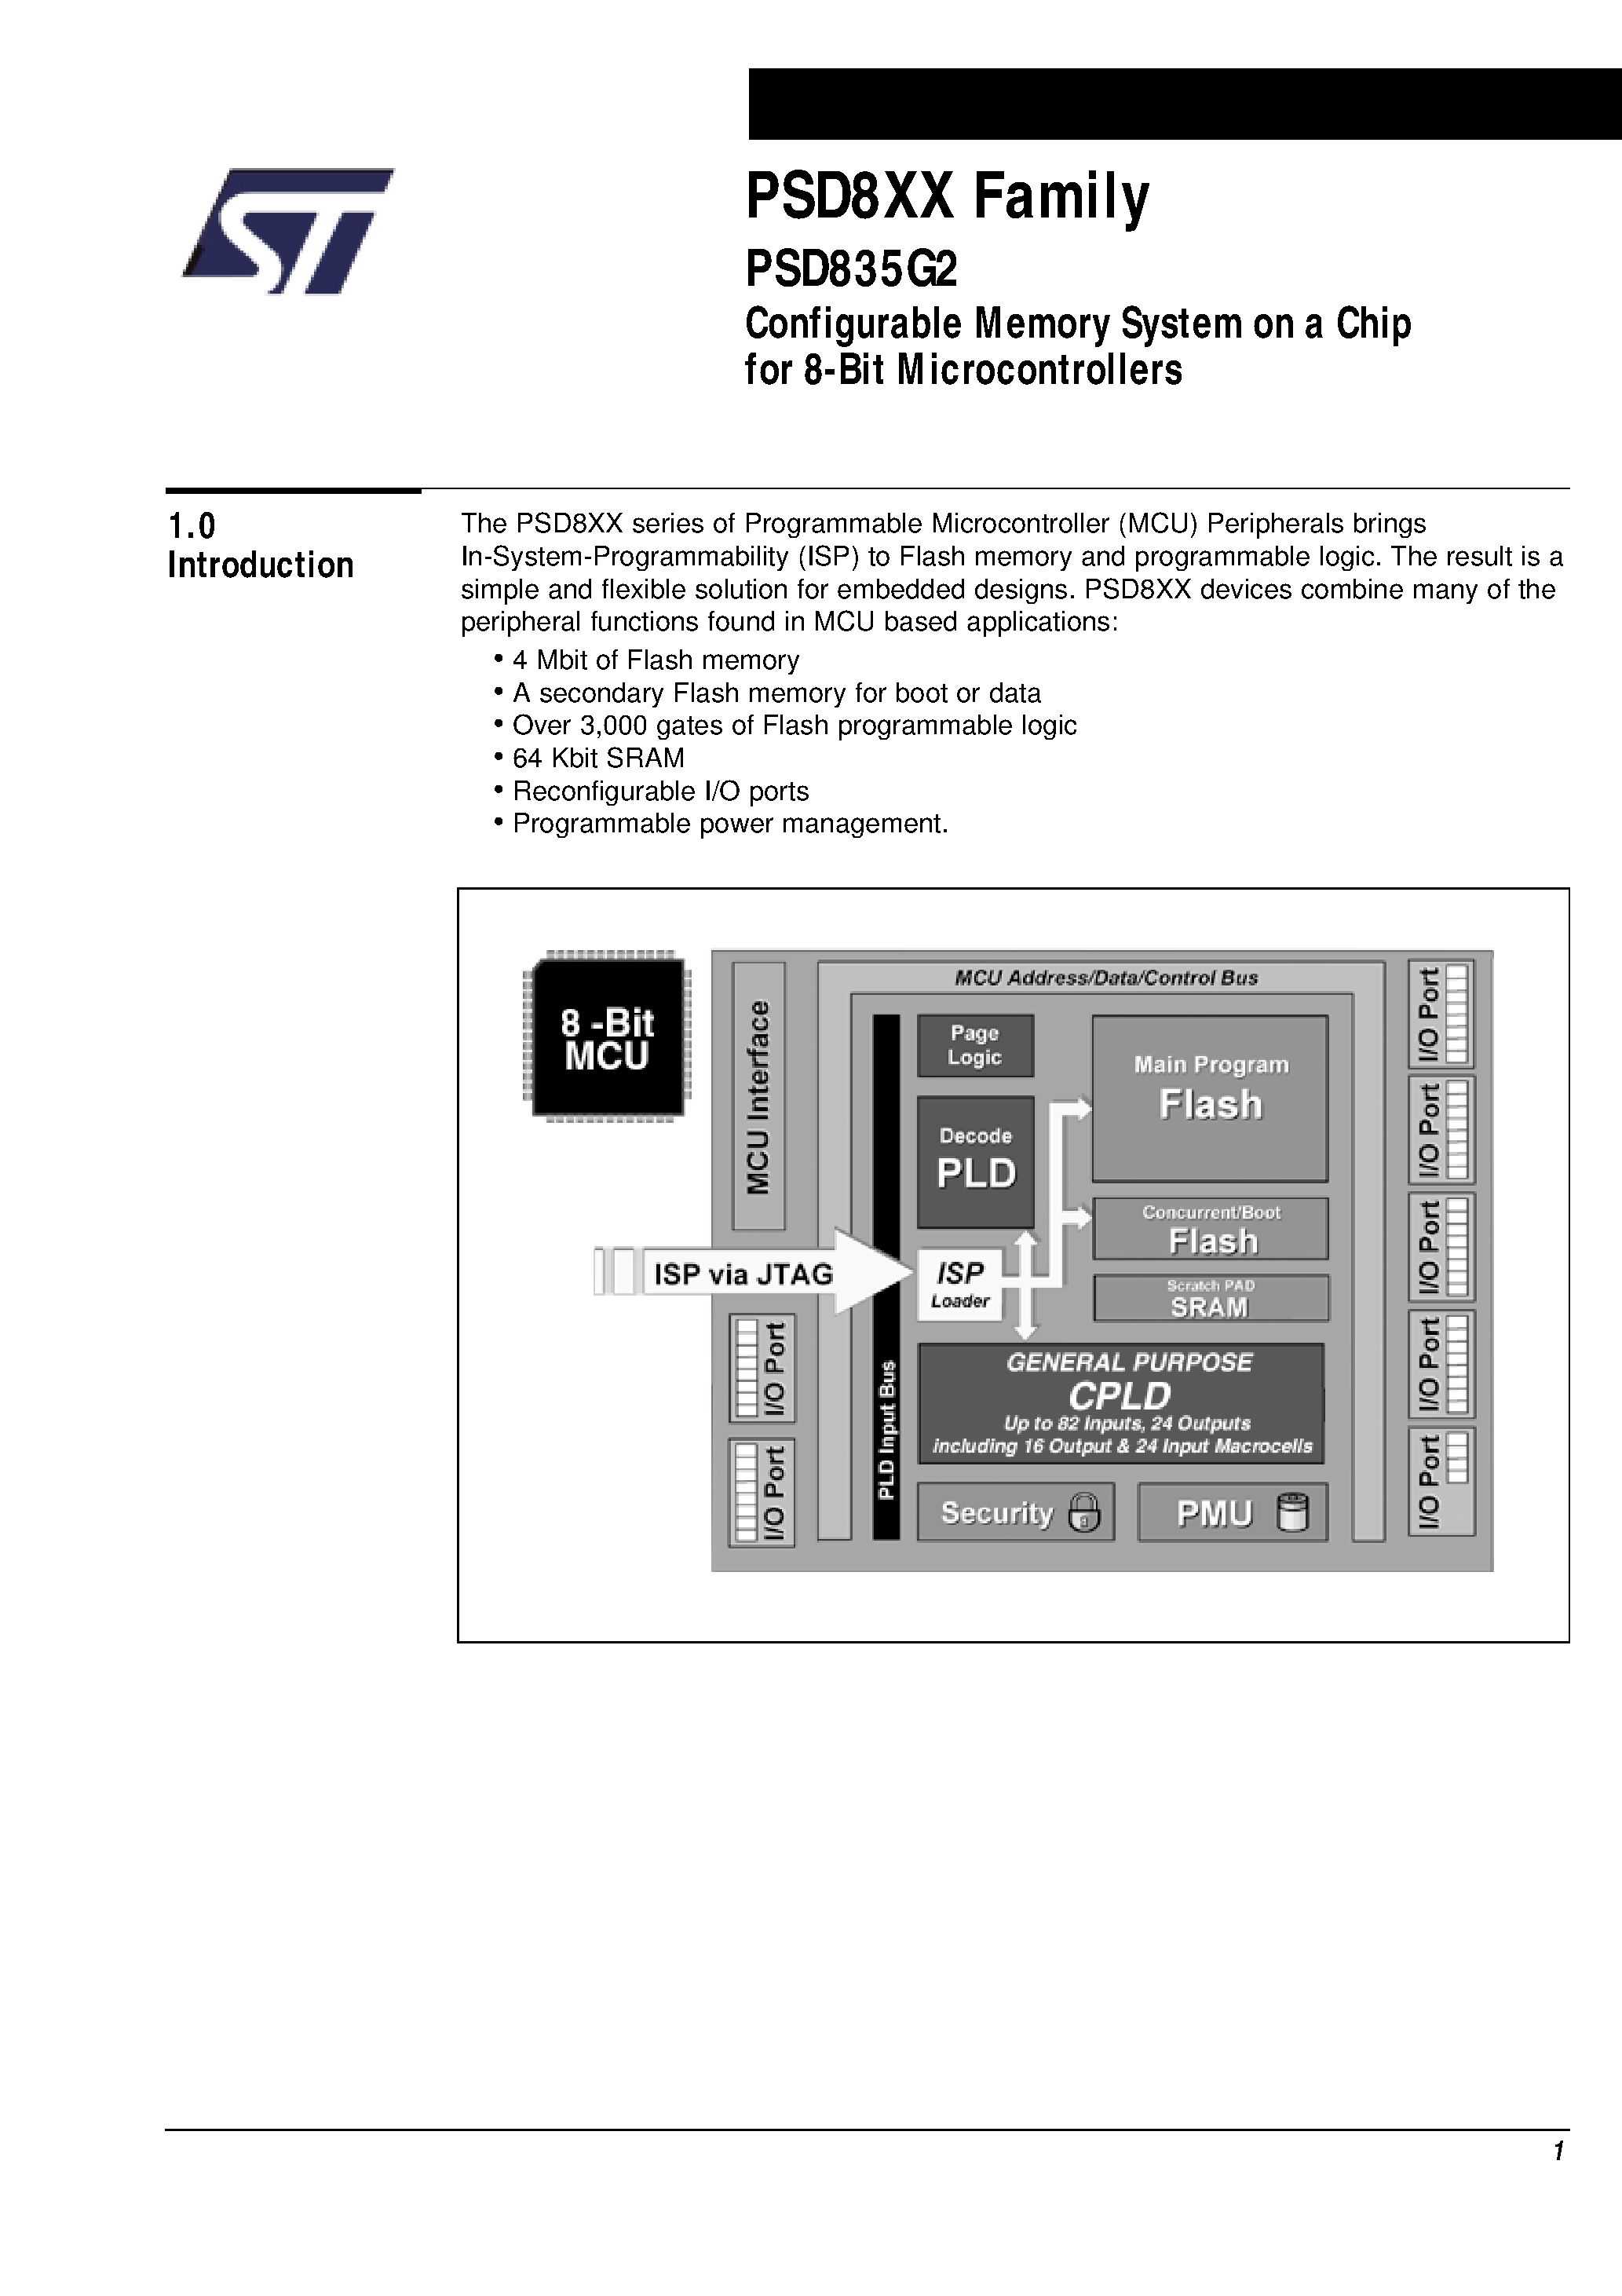 Datasheet PSD835F2V-A-15B81 - Configurable Memory System on a Chip for 8-Bit Microcontrollers page 2